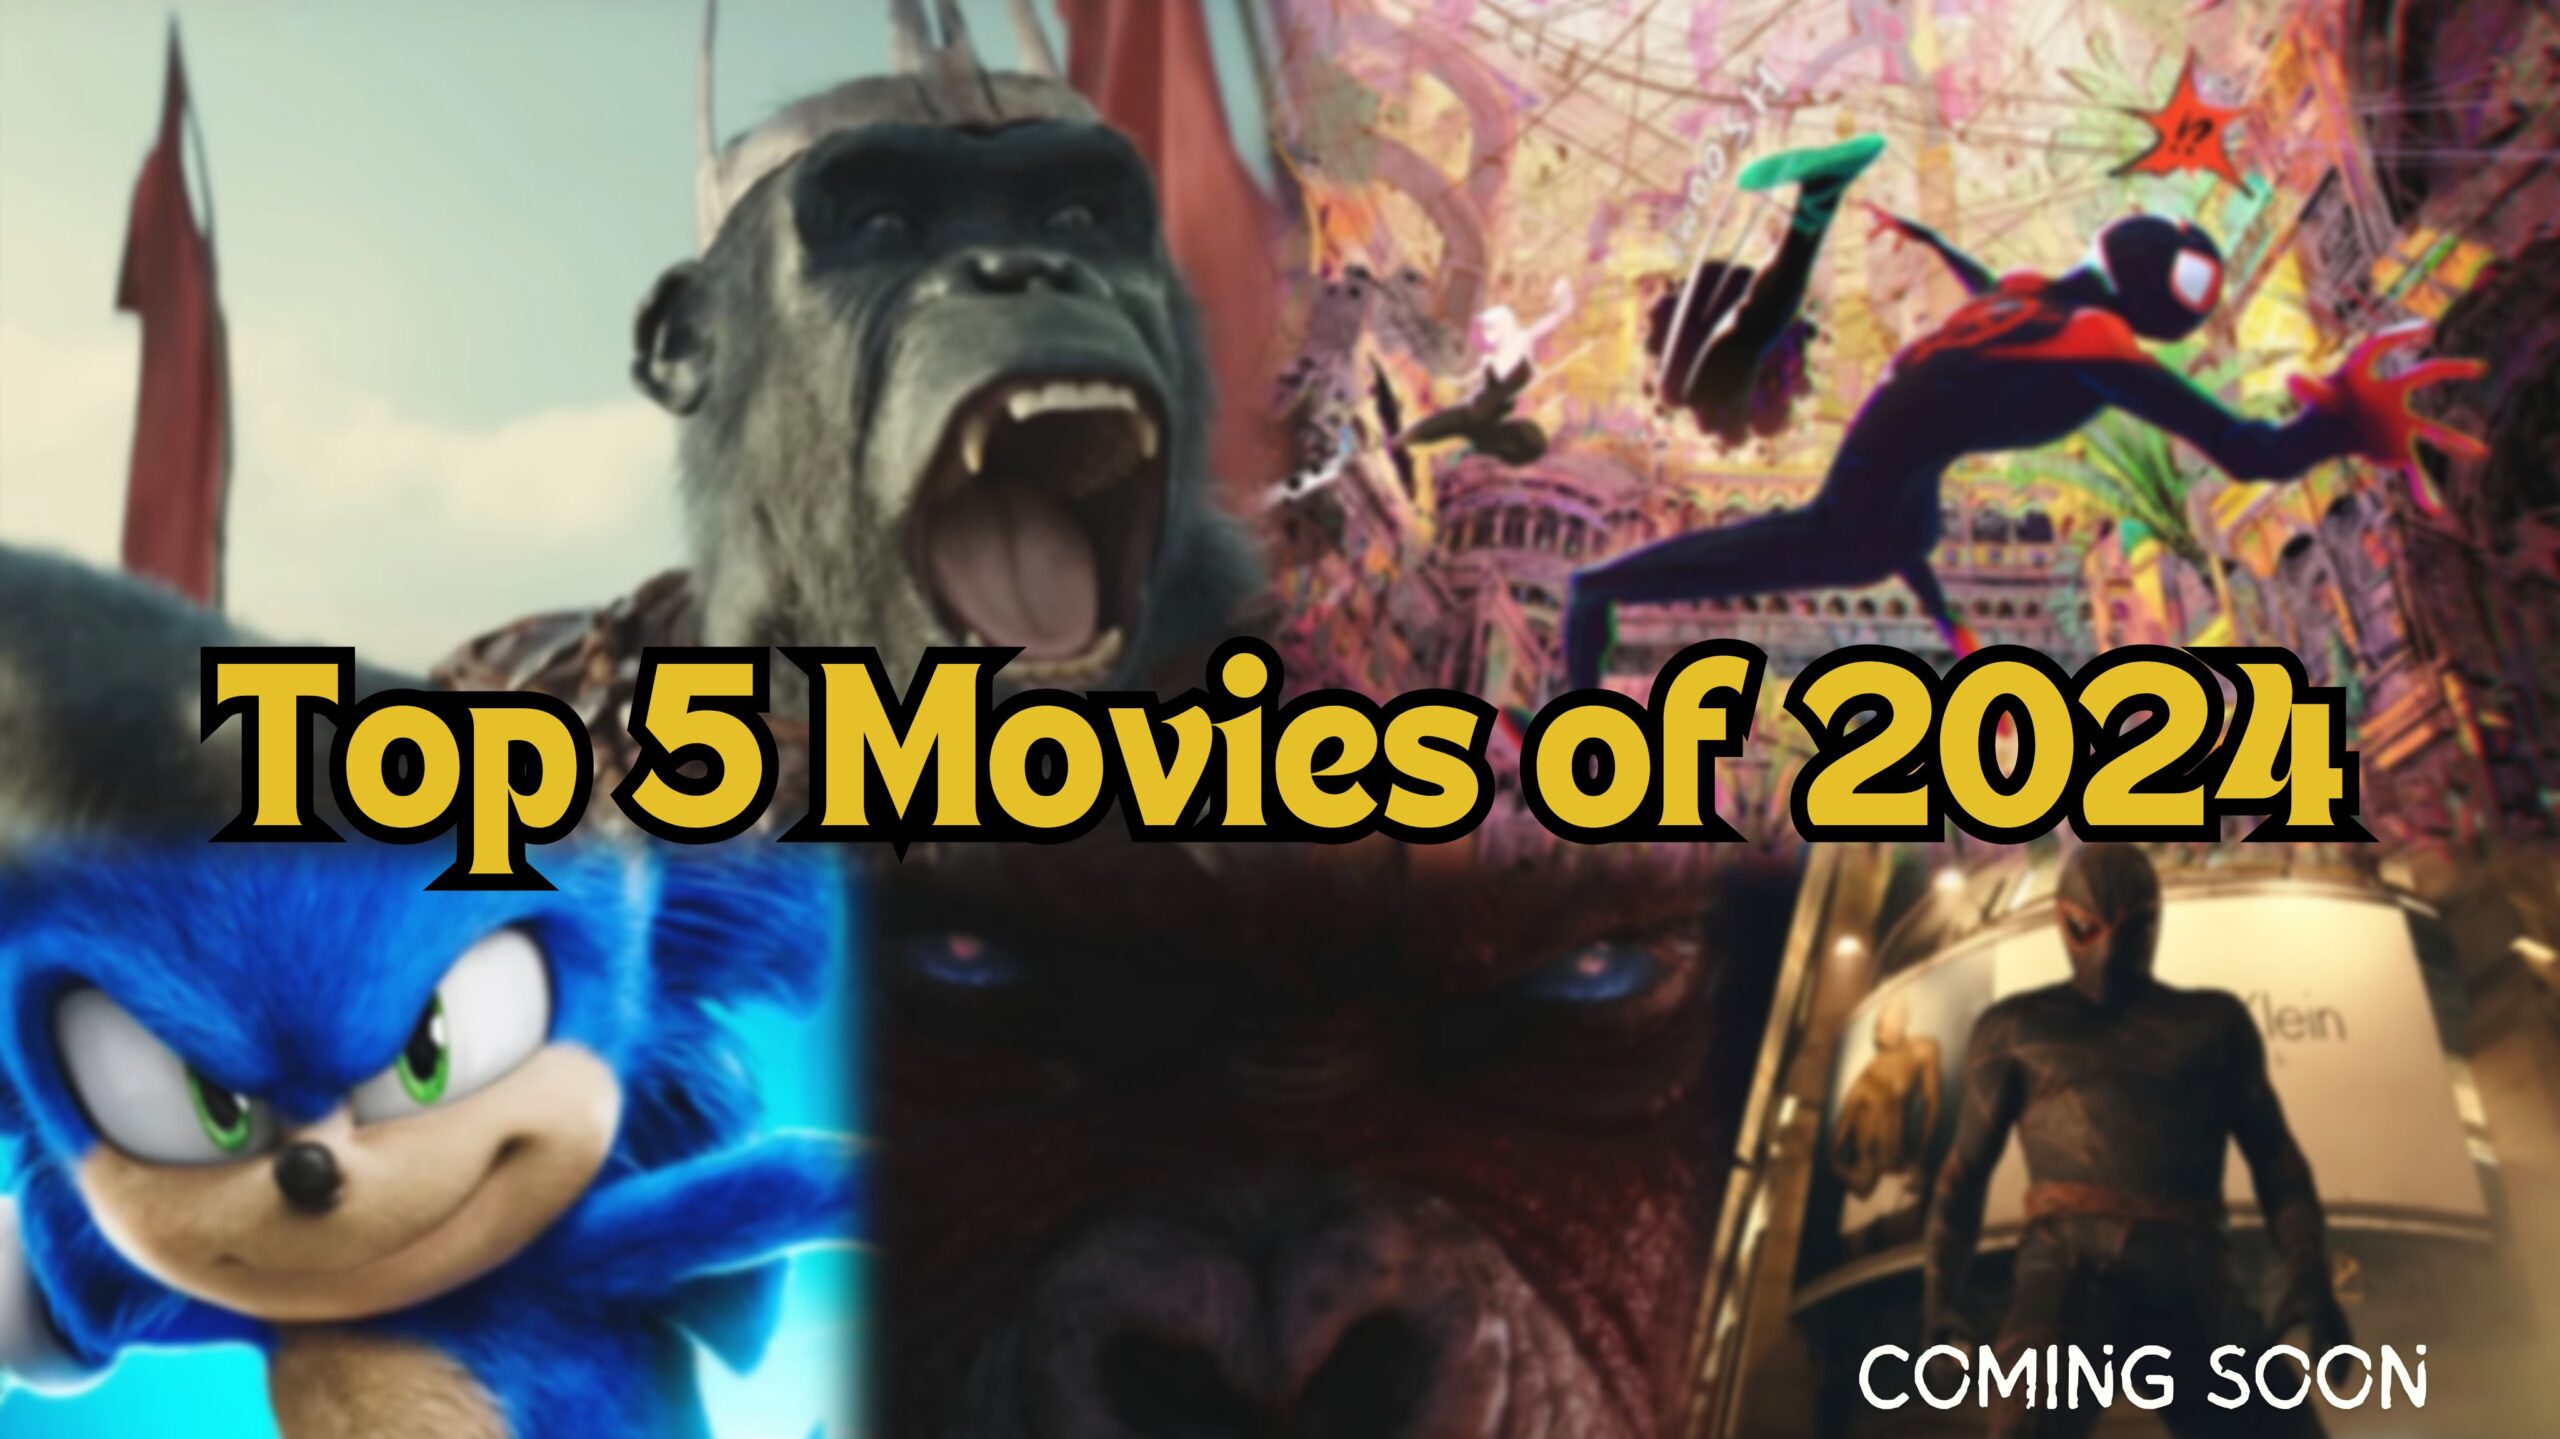 Top 5 Movies of 2024